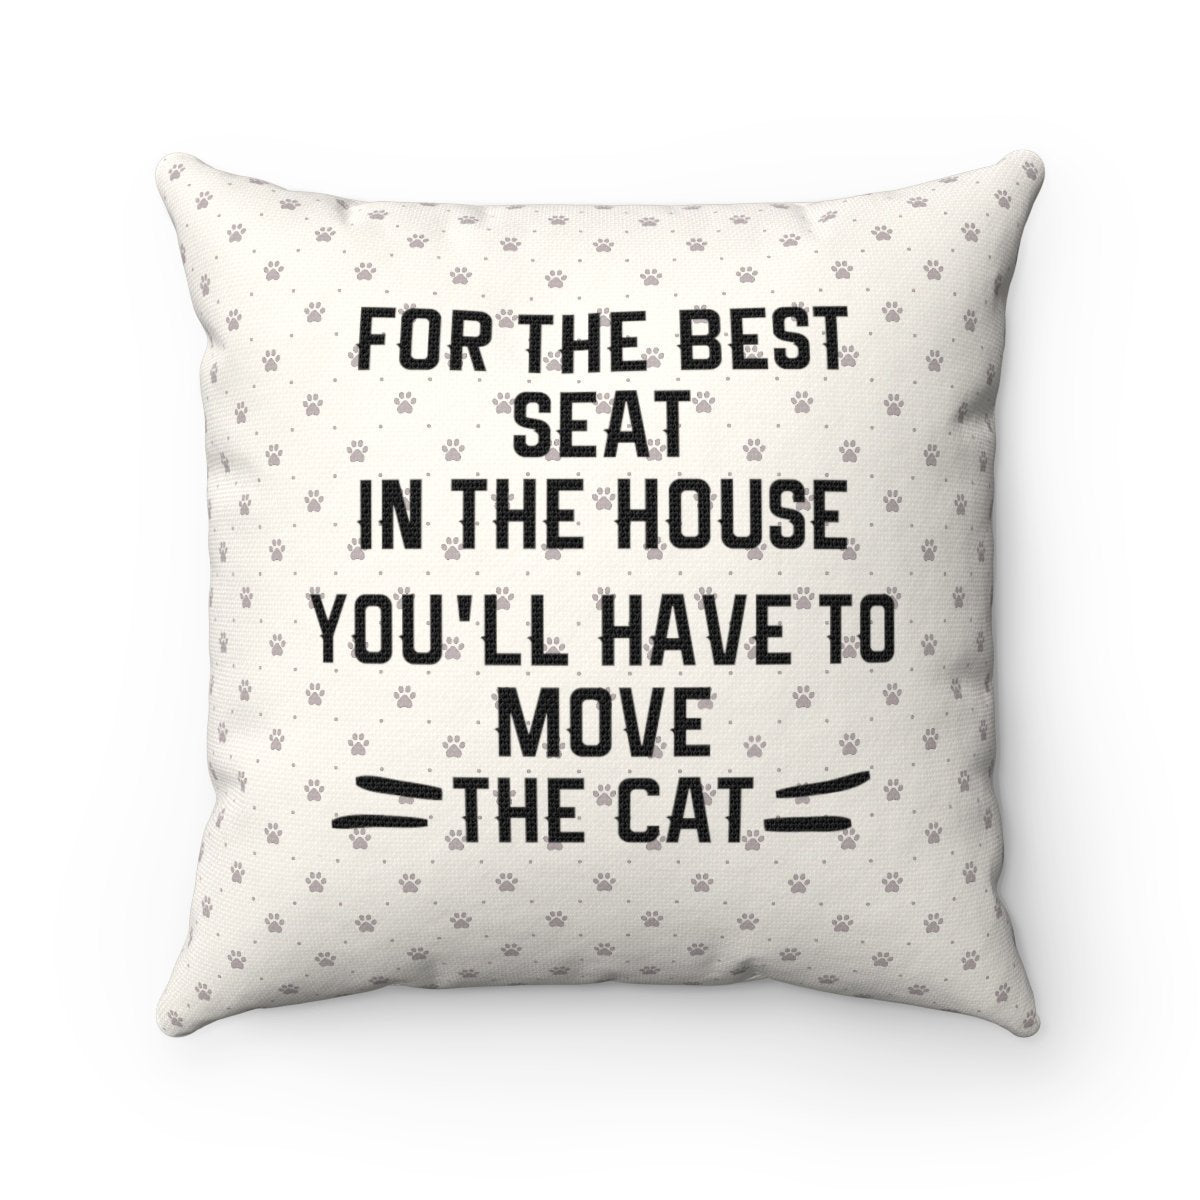 Refresh your cat home accessories collection with this funny cat pillow featuring the text "For the best seat in the house you'll have to move the cat" on a beige paw print background.